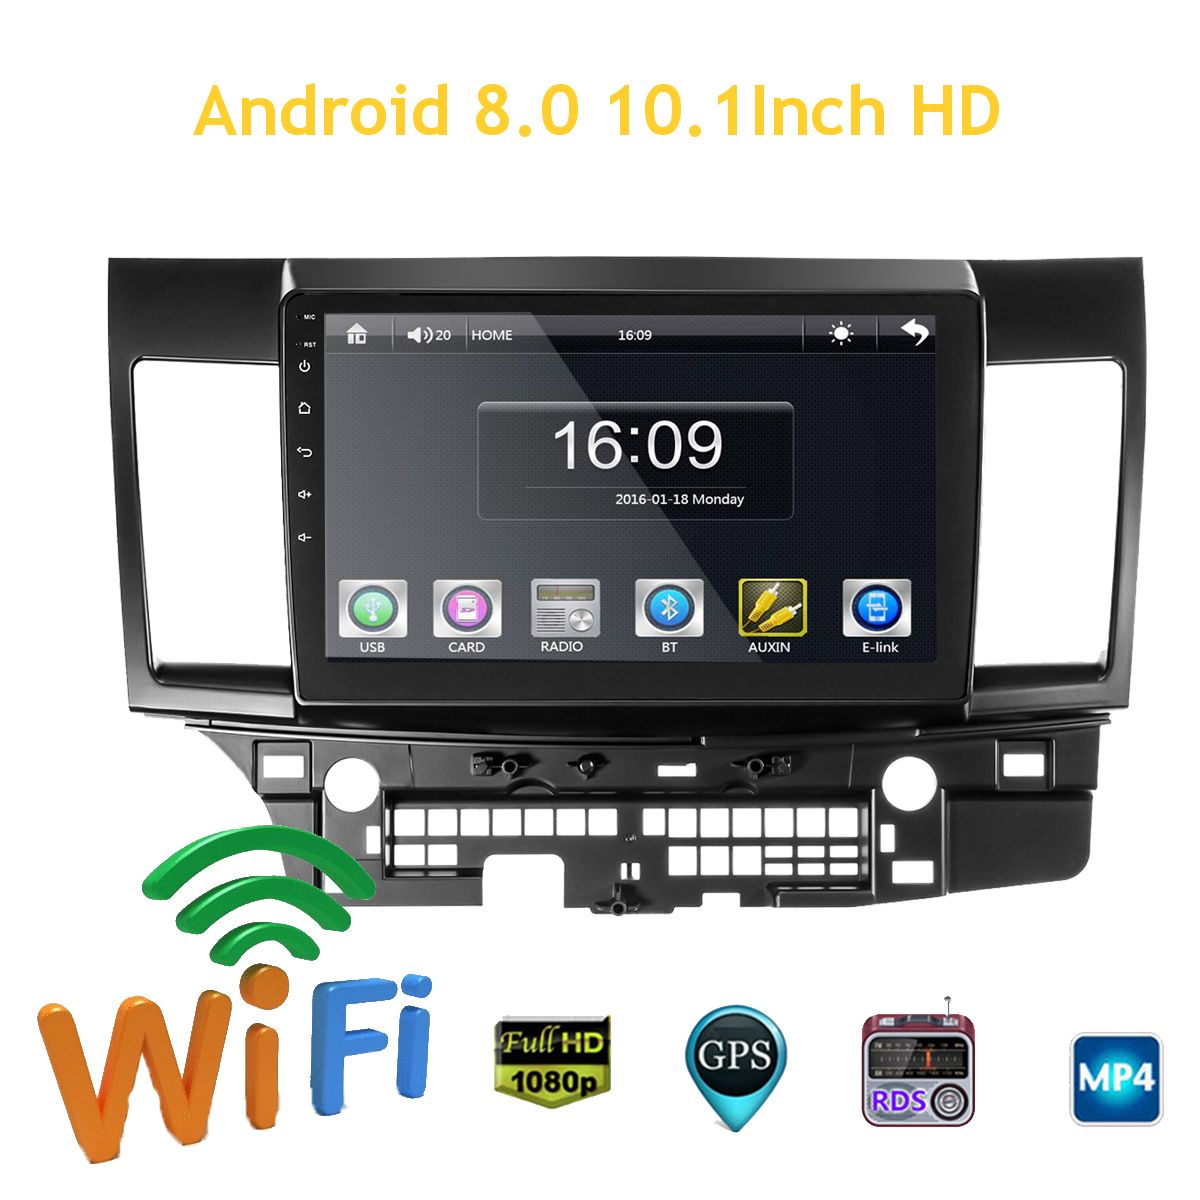 YUEHOO-101-Inch-2-DIN-for-Android-80-Car-Stereo-232G-Quad-Core-MP5-Player-GPS-WIFI-4G-FM-AM-RDS-Radi-1565106